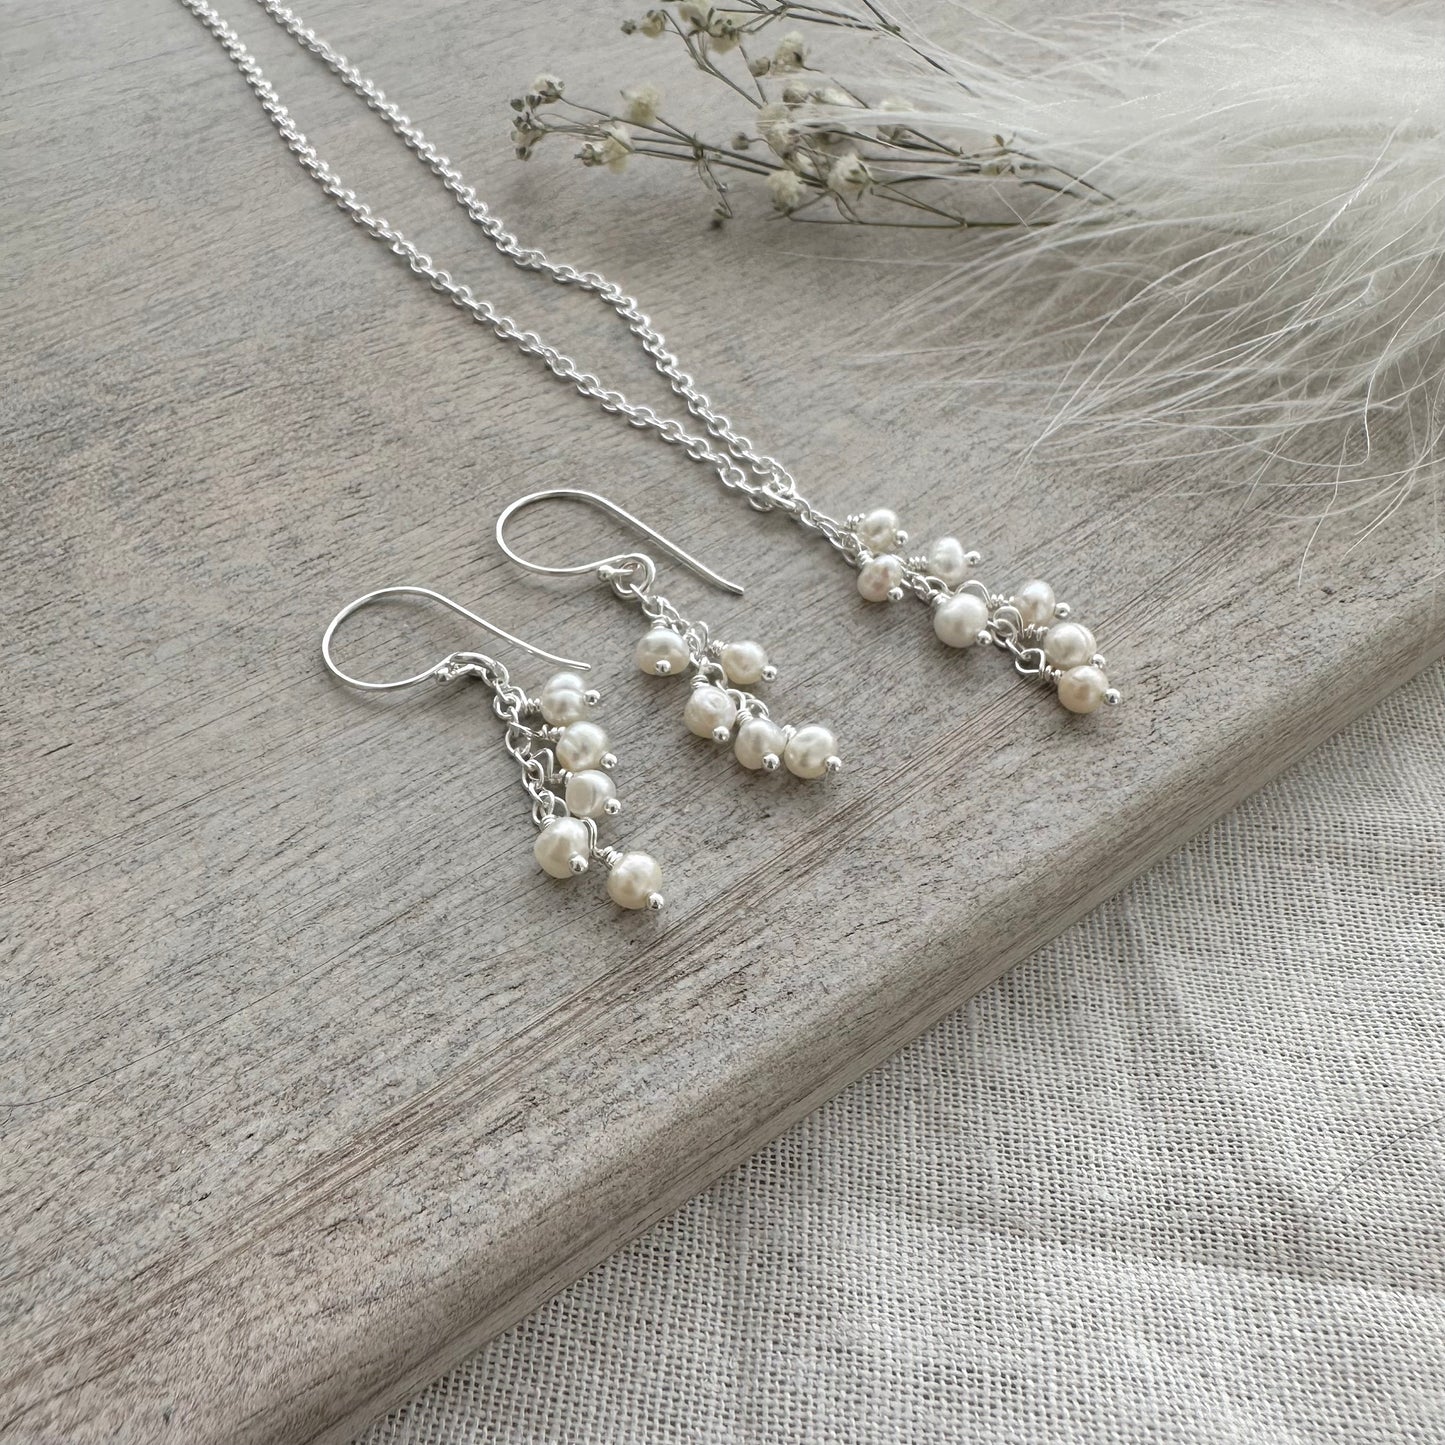 Dainty Pearl Necklace Earring Set for birthday, June Birthstone and Sterling Silver Made to order jewellery gift for women